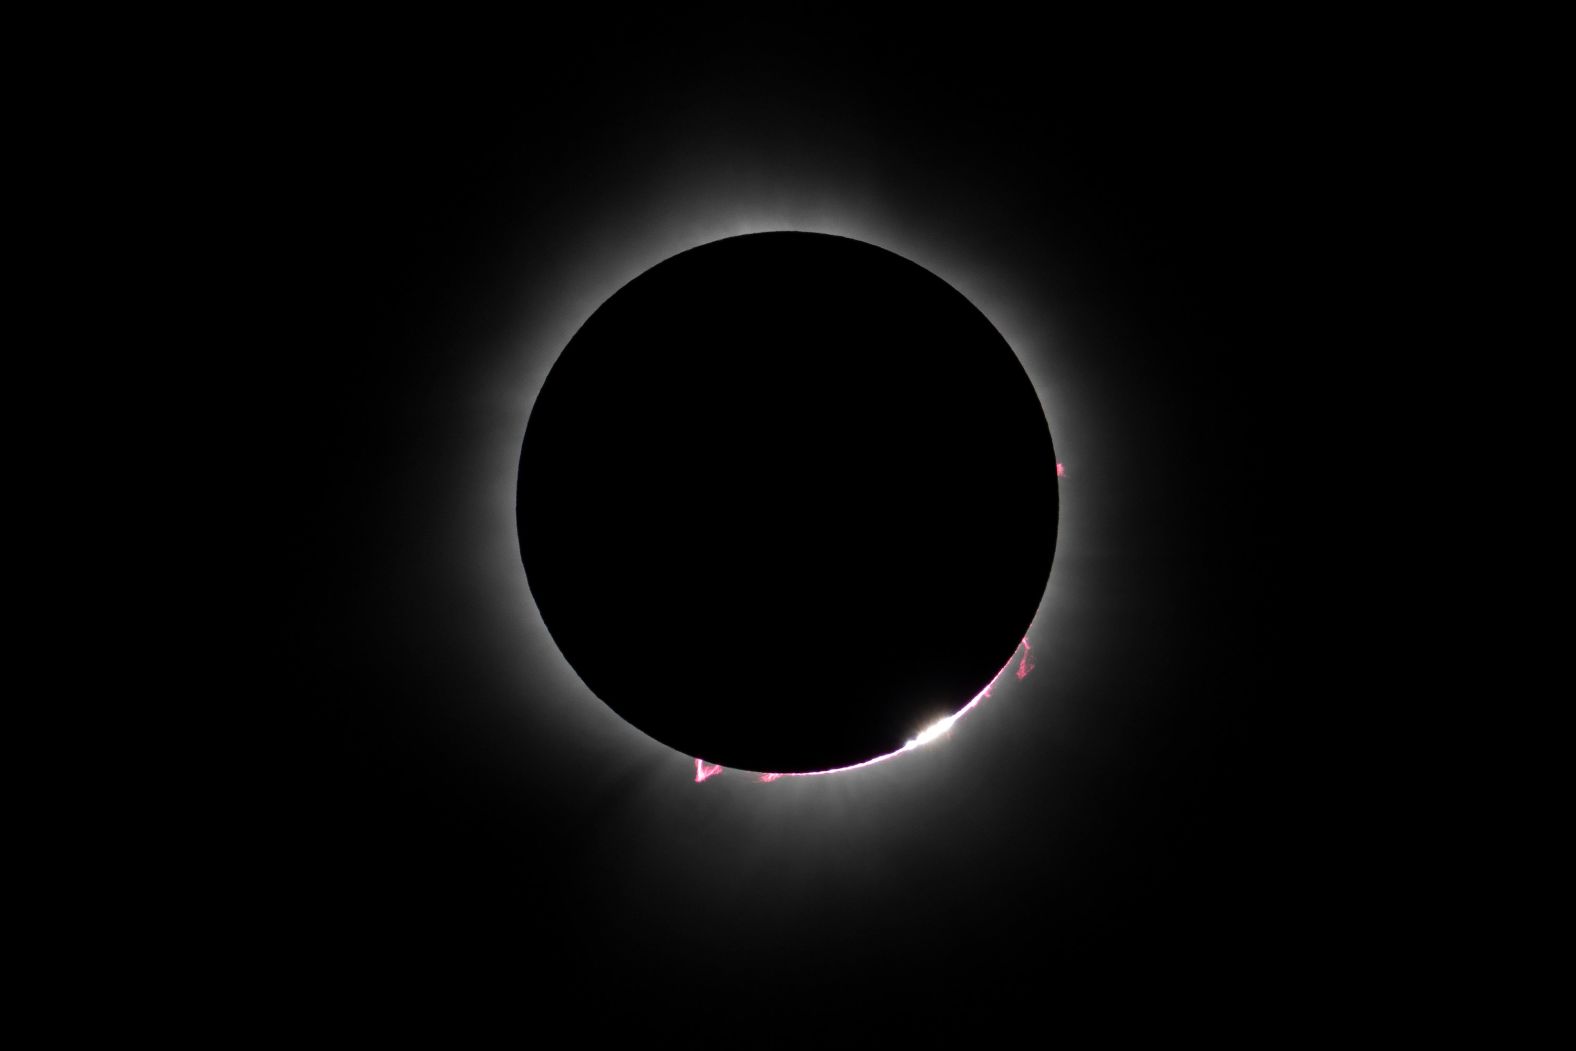 The Baily's Beads effect and red prominences coming off the sun are pictured during the eclipse as seen from Magog.